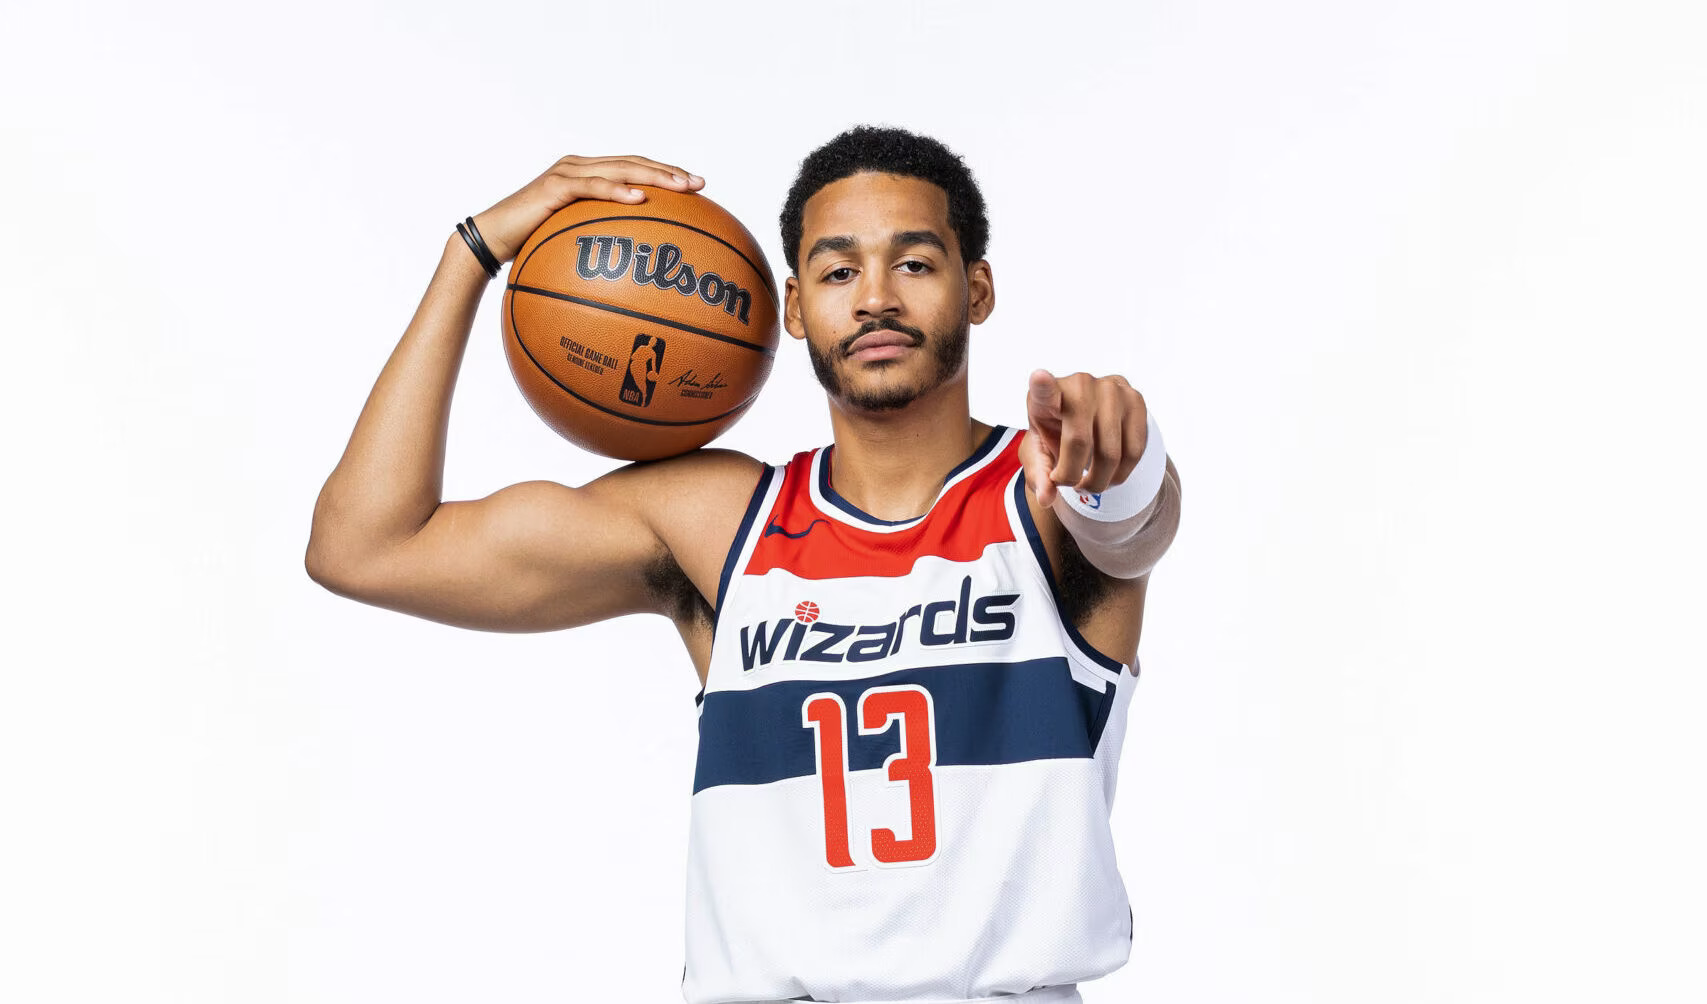 wizards player 13